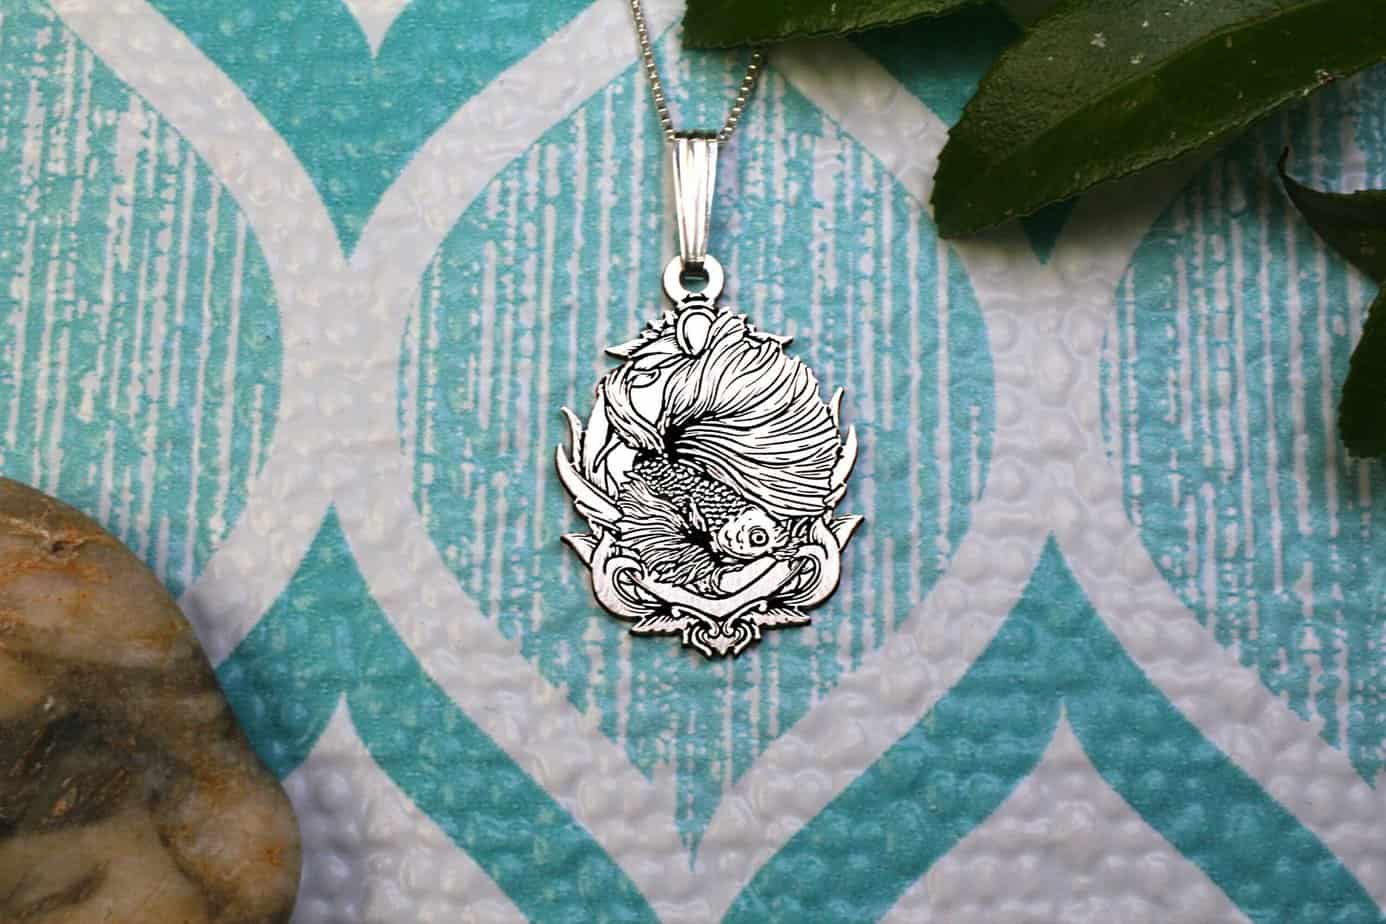 Betta Fish Necklace | Sterling Silver Animal Pendant | Engraved Koi Fish Charm | Minimalist Jewelry Gift For Men & Women